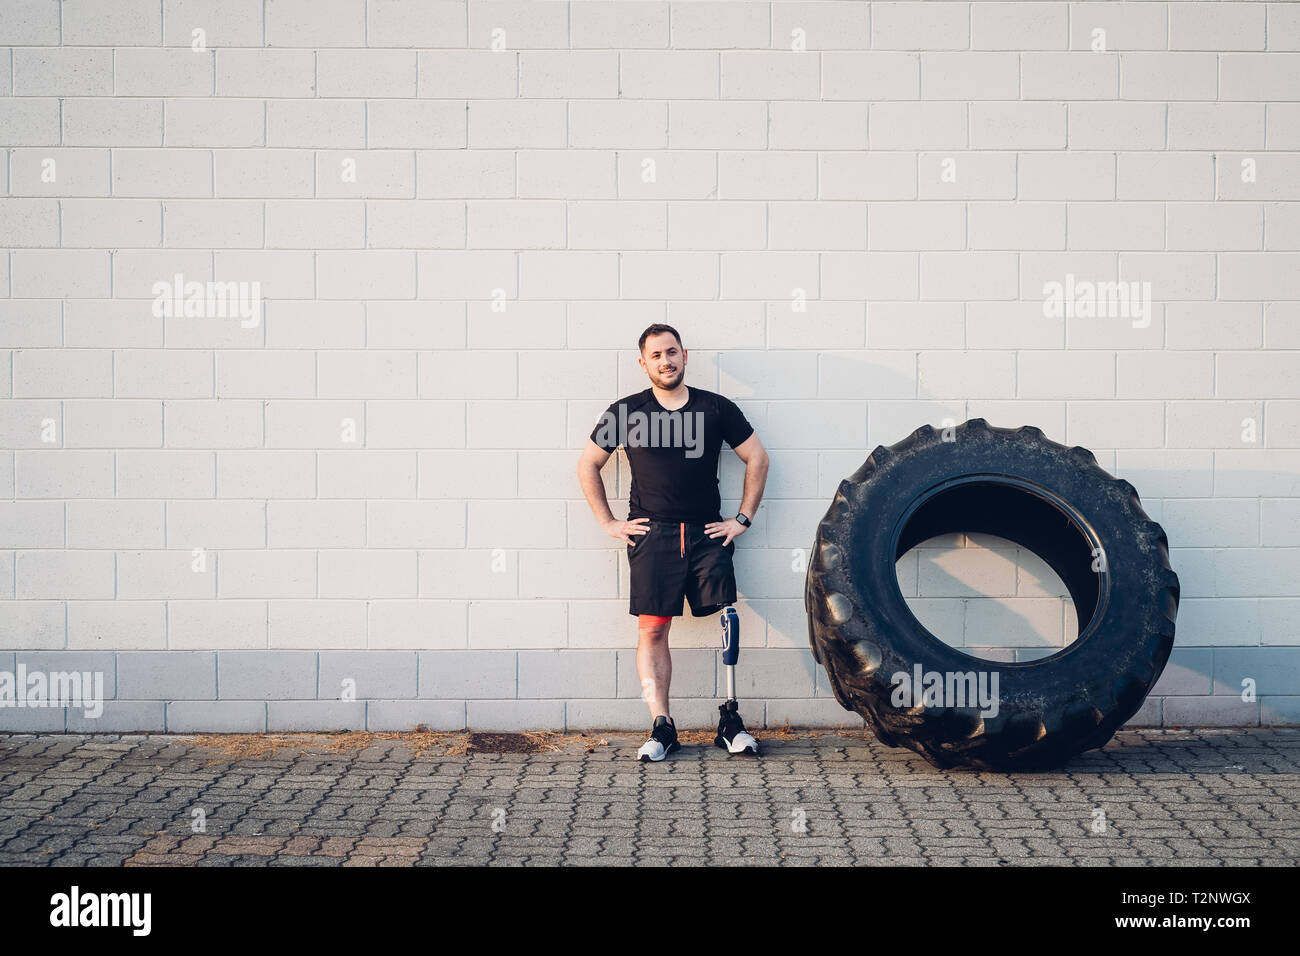 Man with prosthetic leg leaning on wall beside training tyre Stock Photo